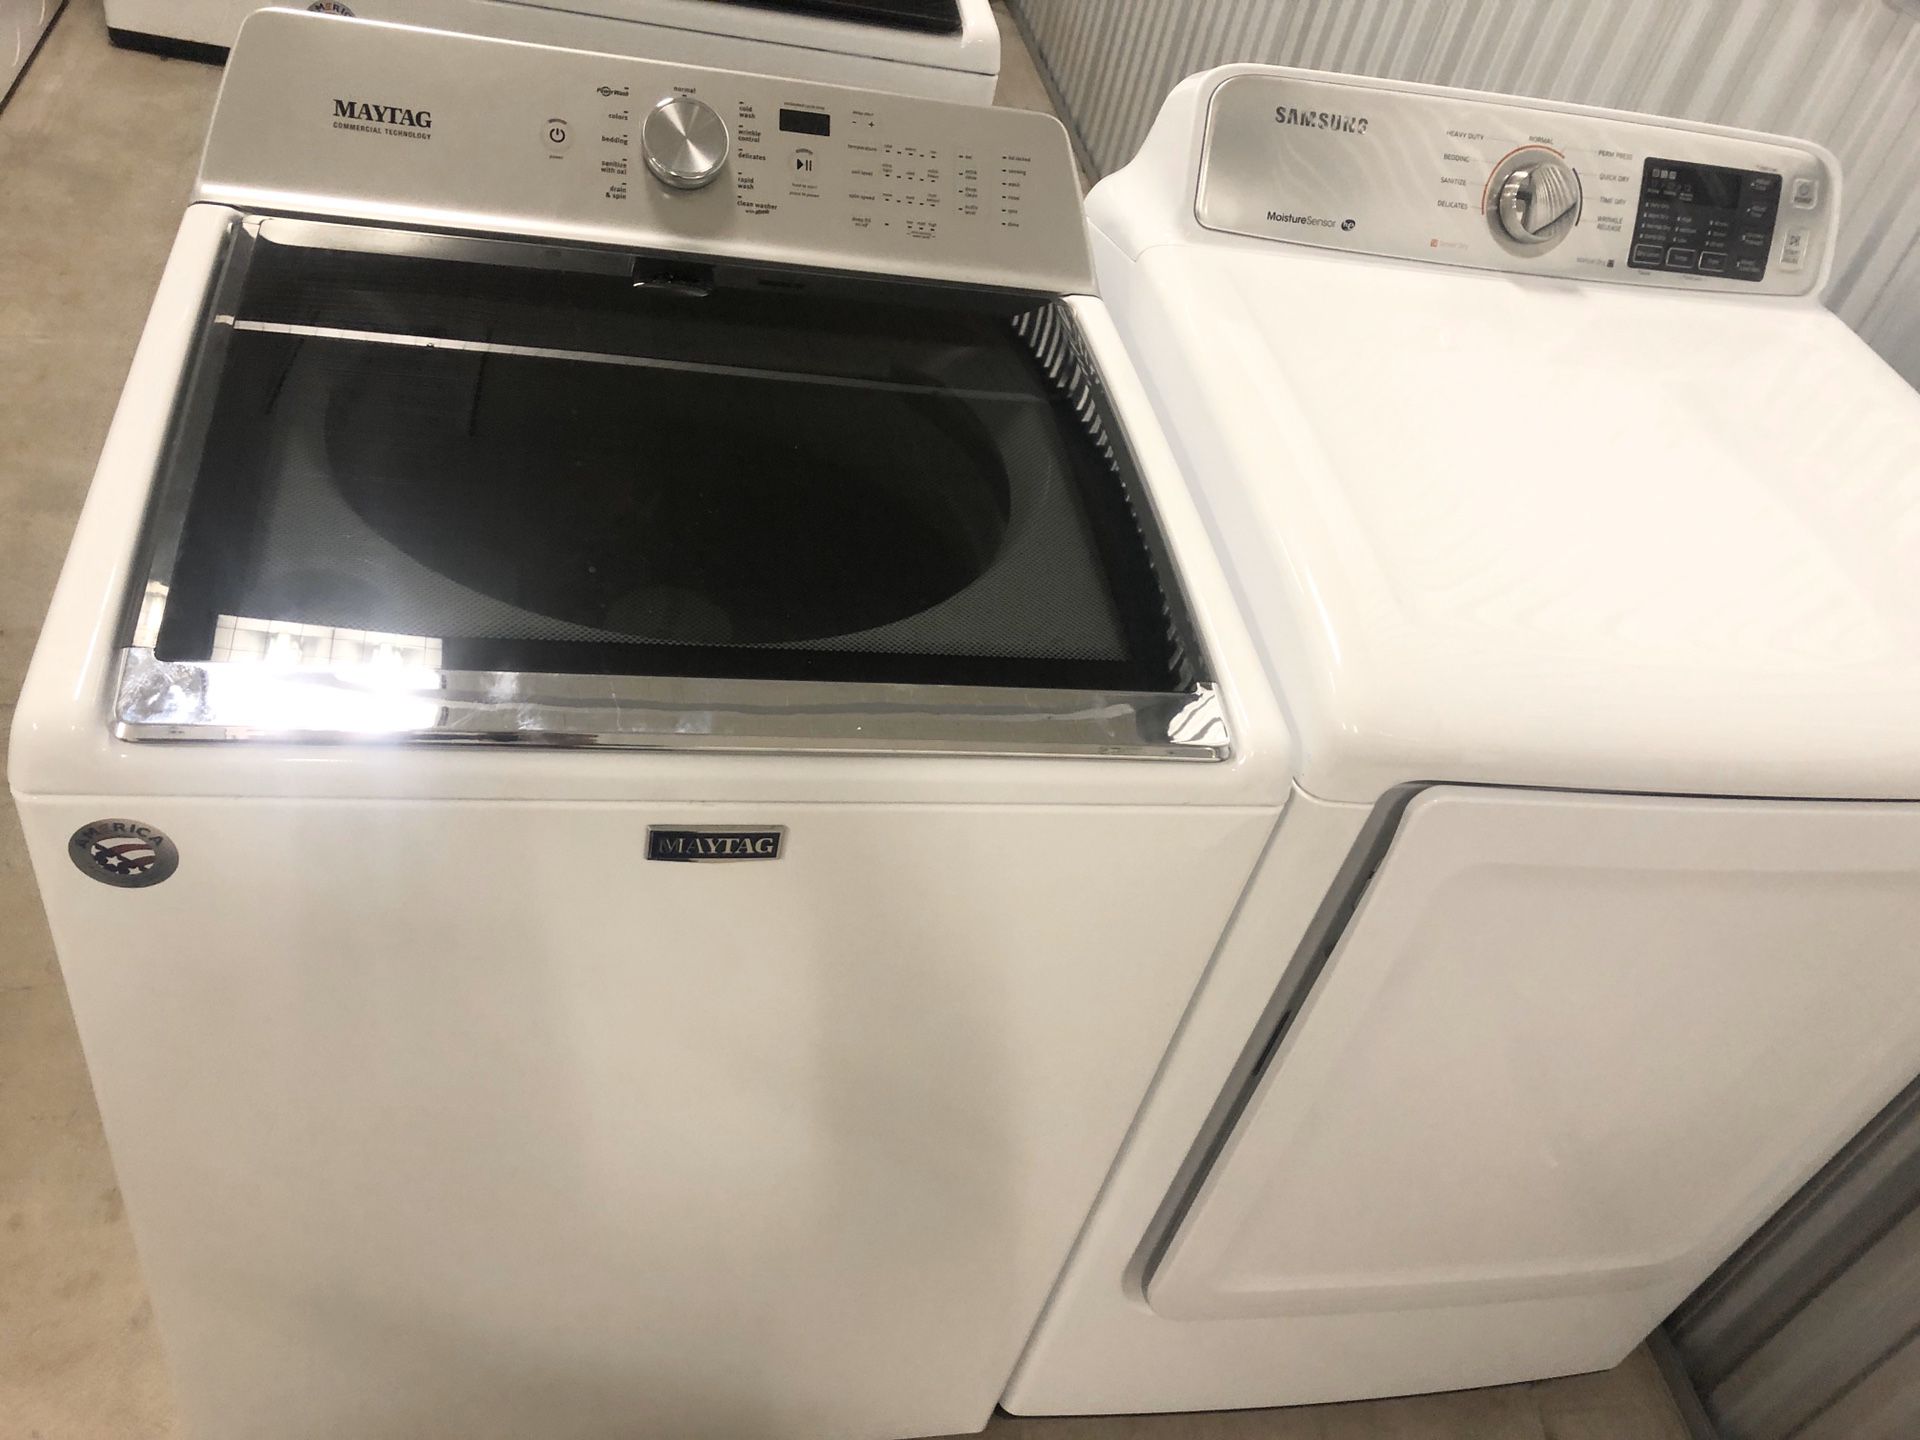 Maytag washer and Samsung electric dryer